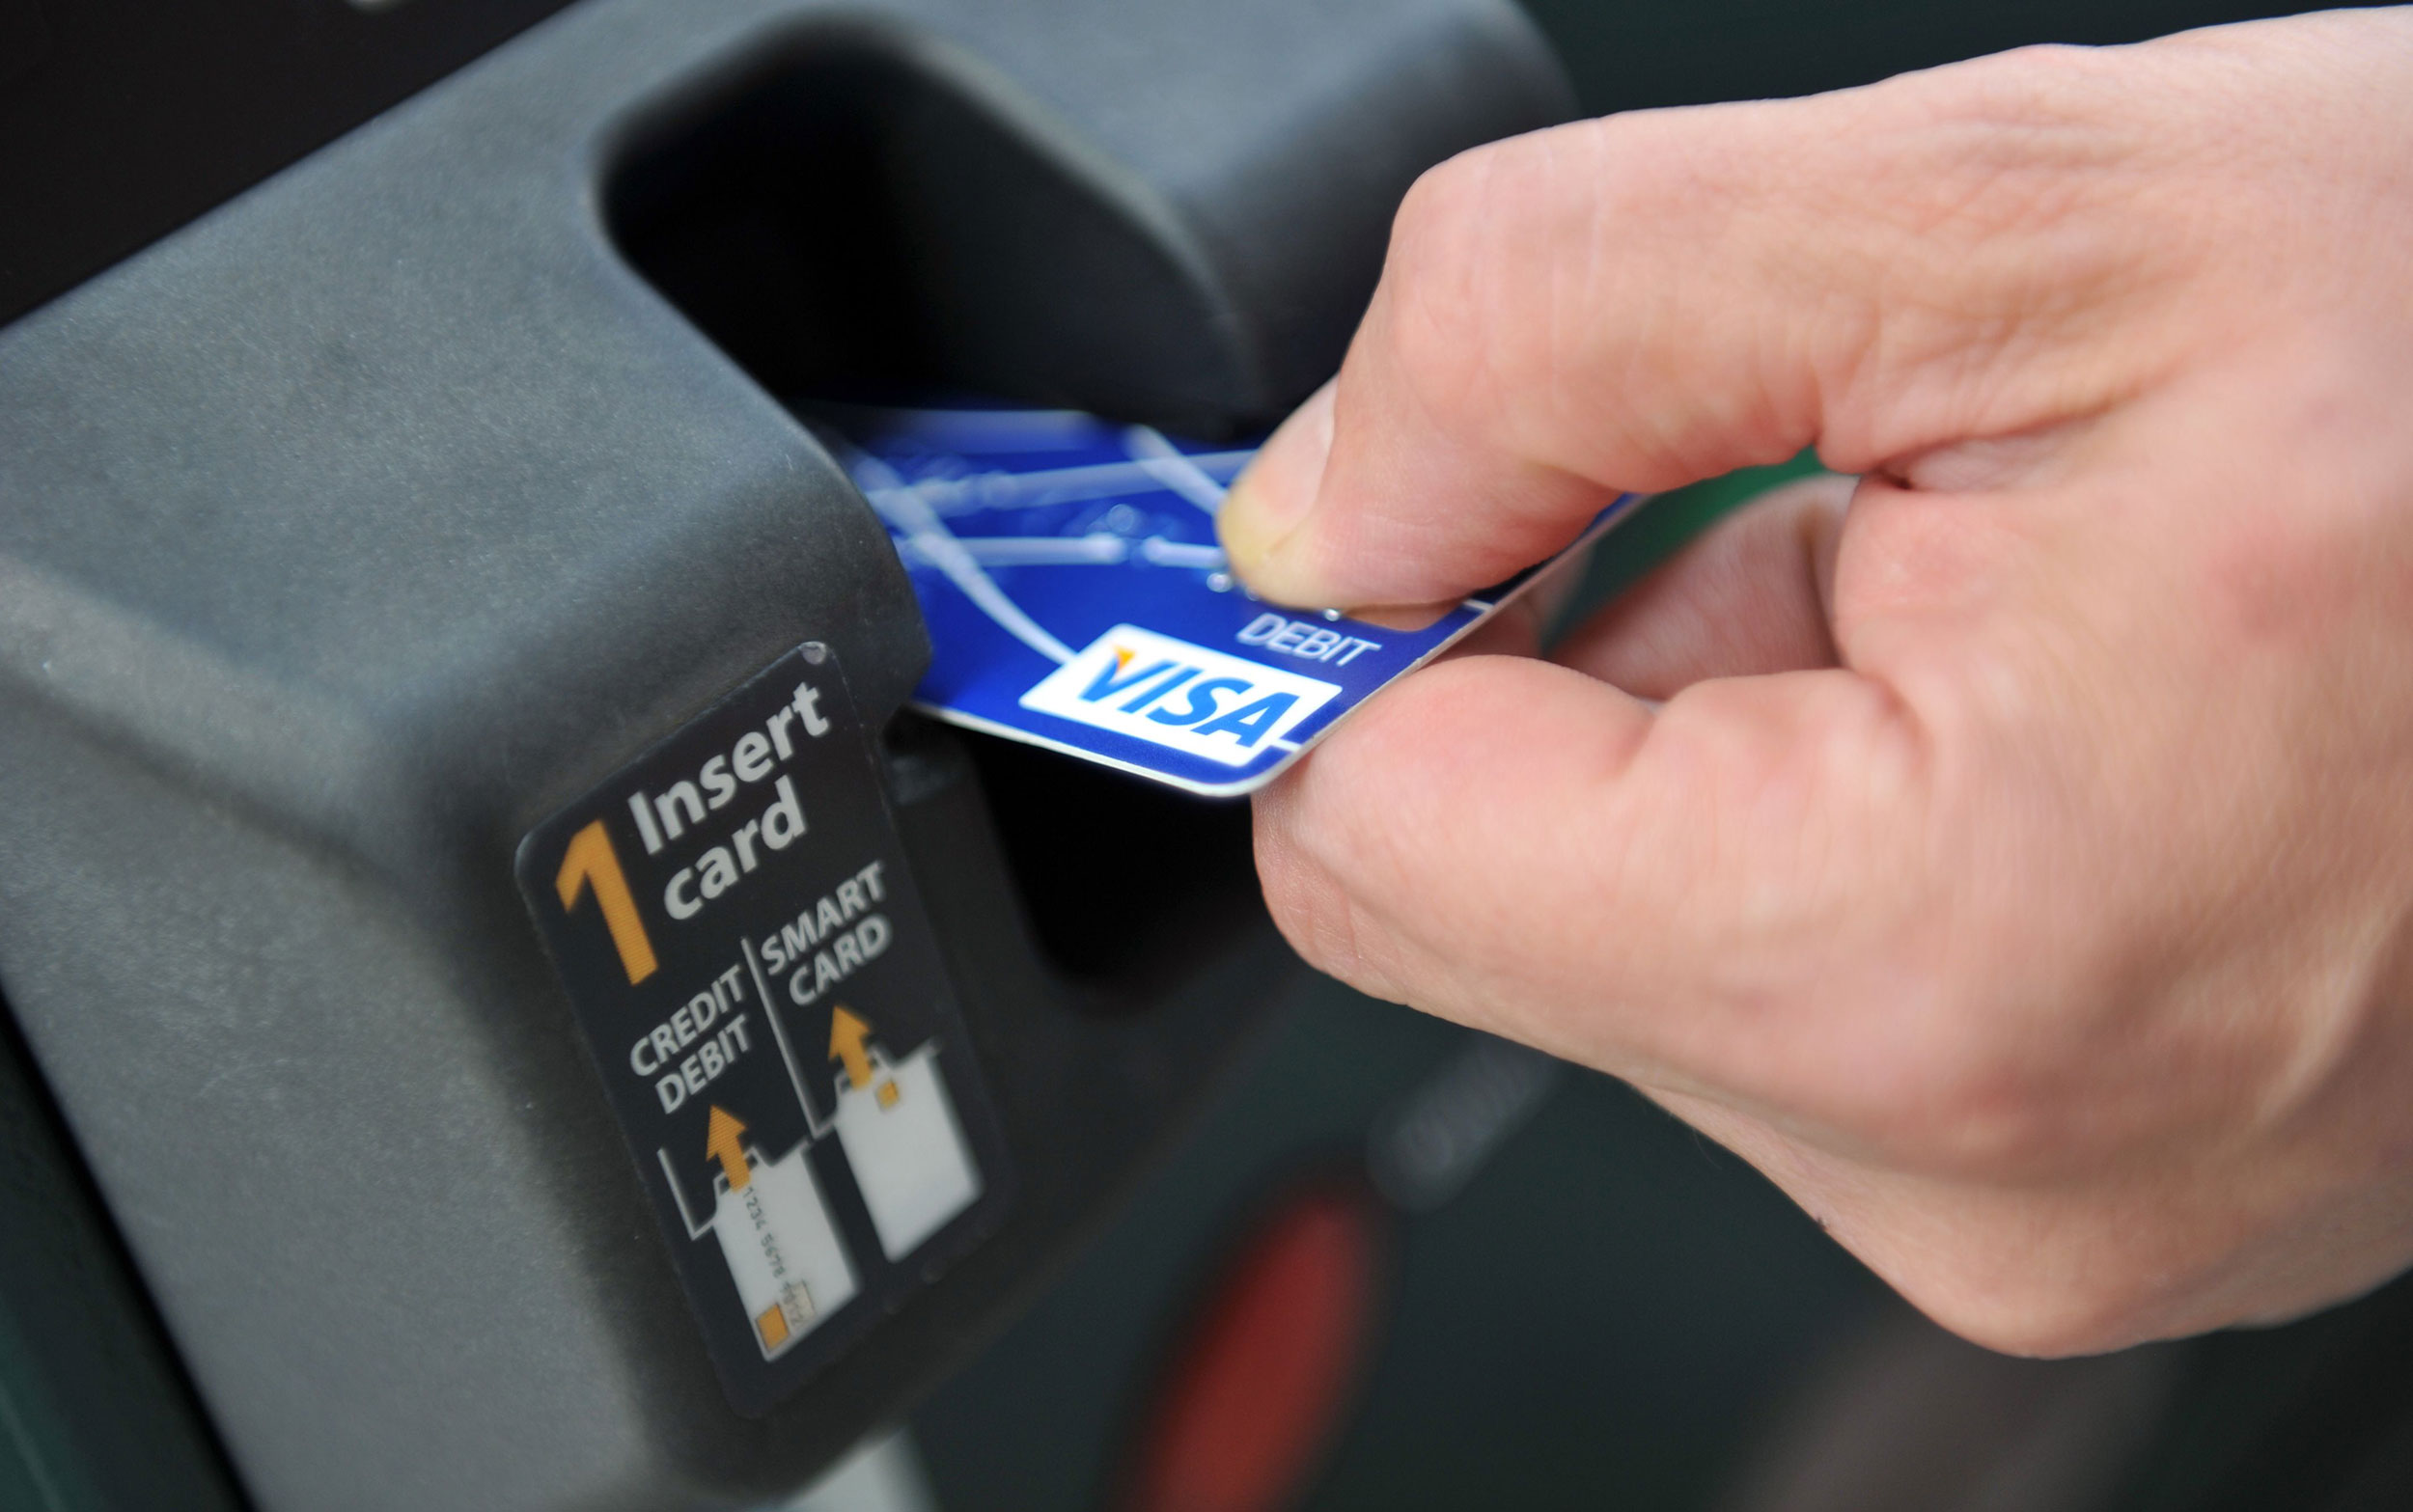 A credit card is swiped at a parking meter on August 20, 2010 in Washington. New rules issued by th...